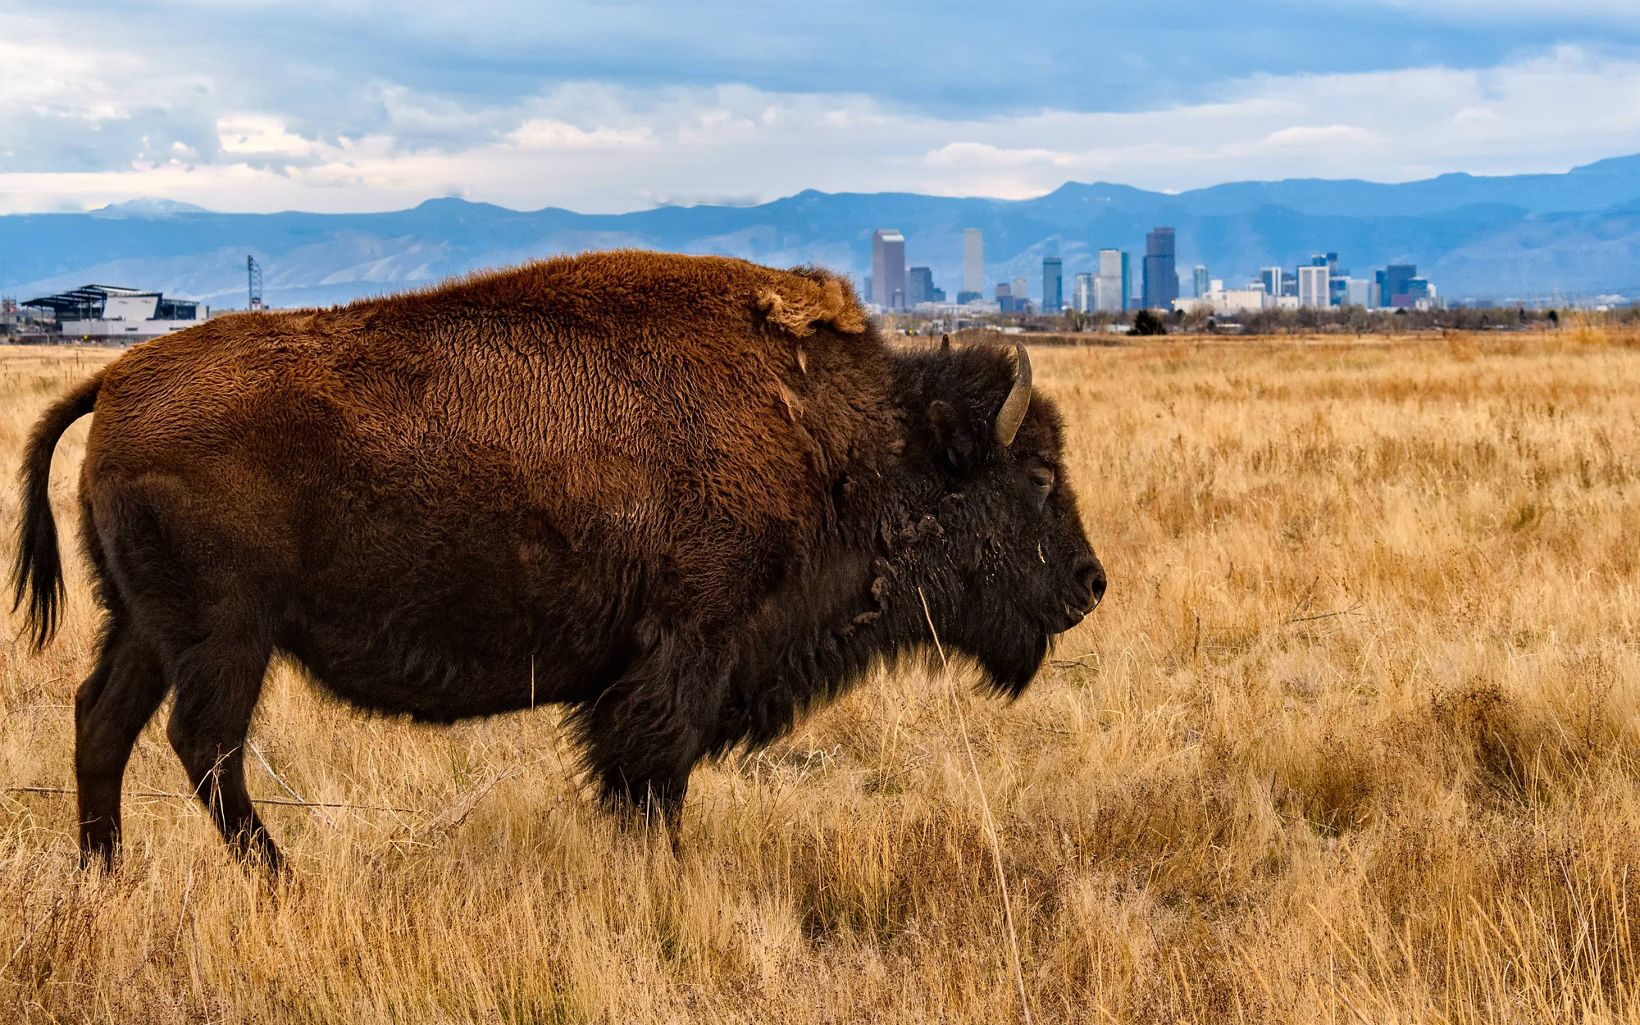 This bison image was taken in the Rocky Mountain Arsenal National Wildlife Refuge in Commerce City, CO, which is a suburb about 15 miles NE of Denver.